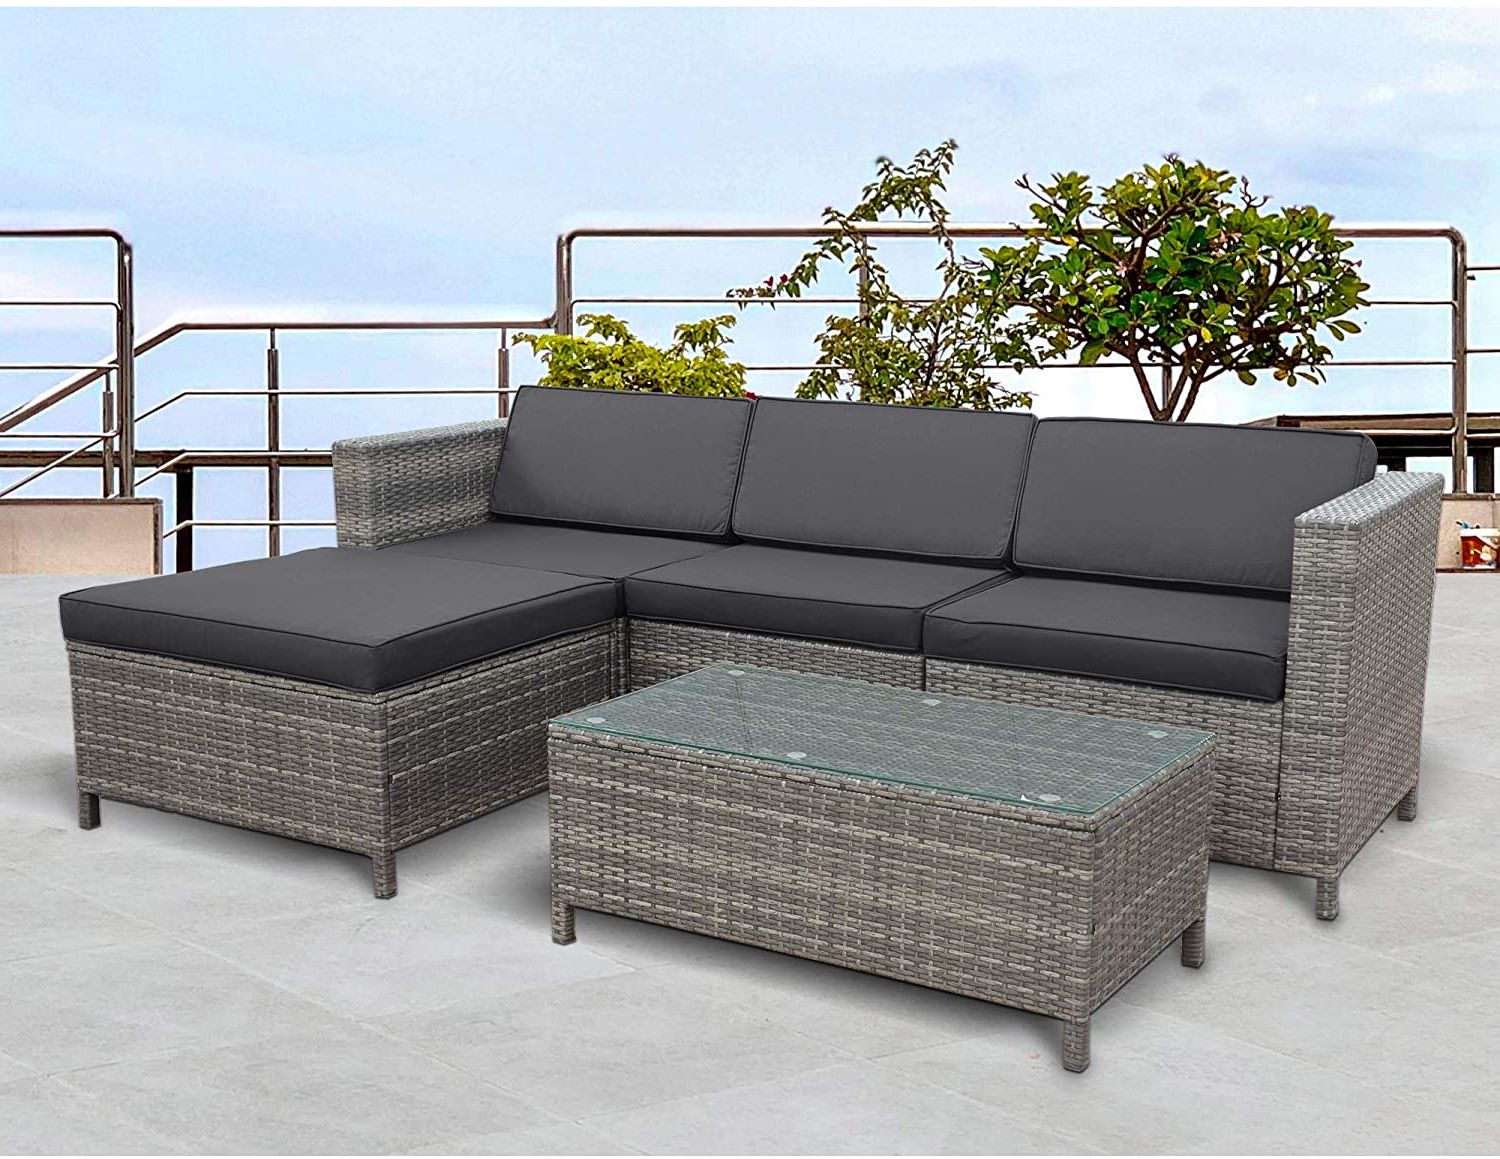 Trendy Outdoor Wicker Sectional Sofa Sets With Regard To 5 Piece Outdoor Patio Furniture Set, All Weather Wicker Rattan (View 2 of 15)